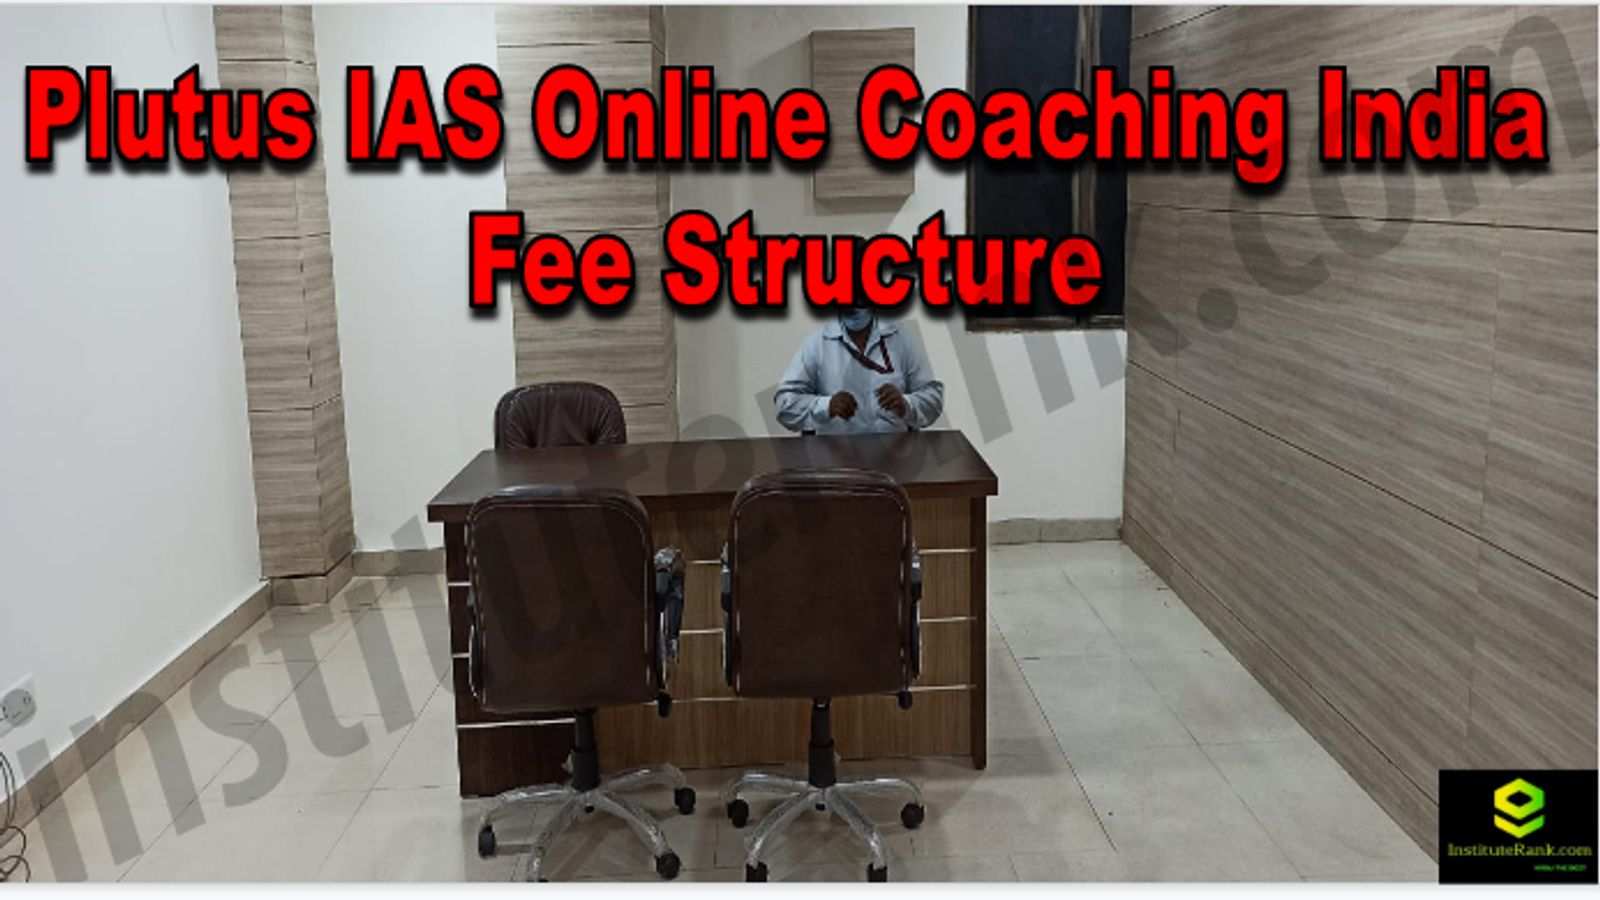 Plutus IAS Online Coaching India Reviews Fee Structure